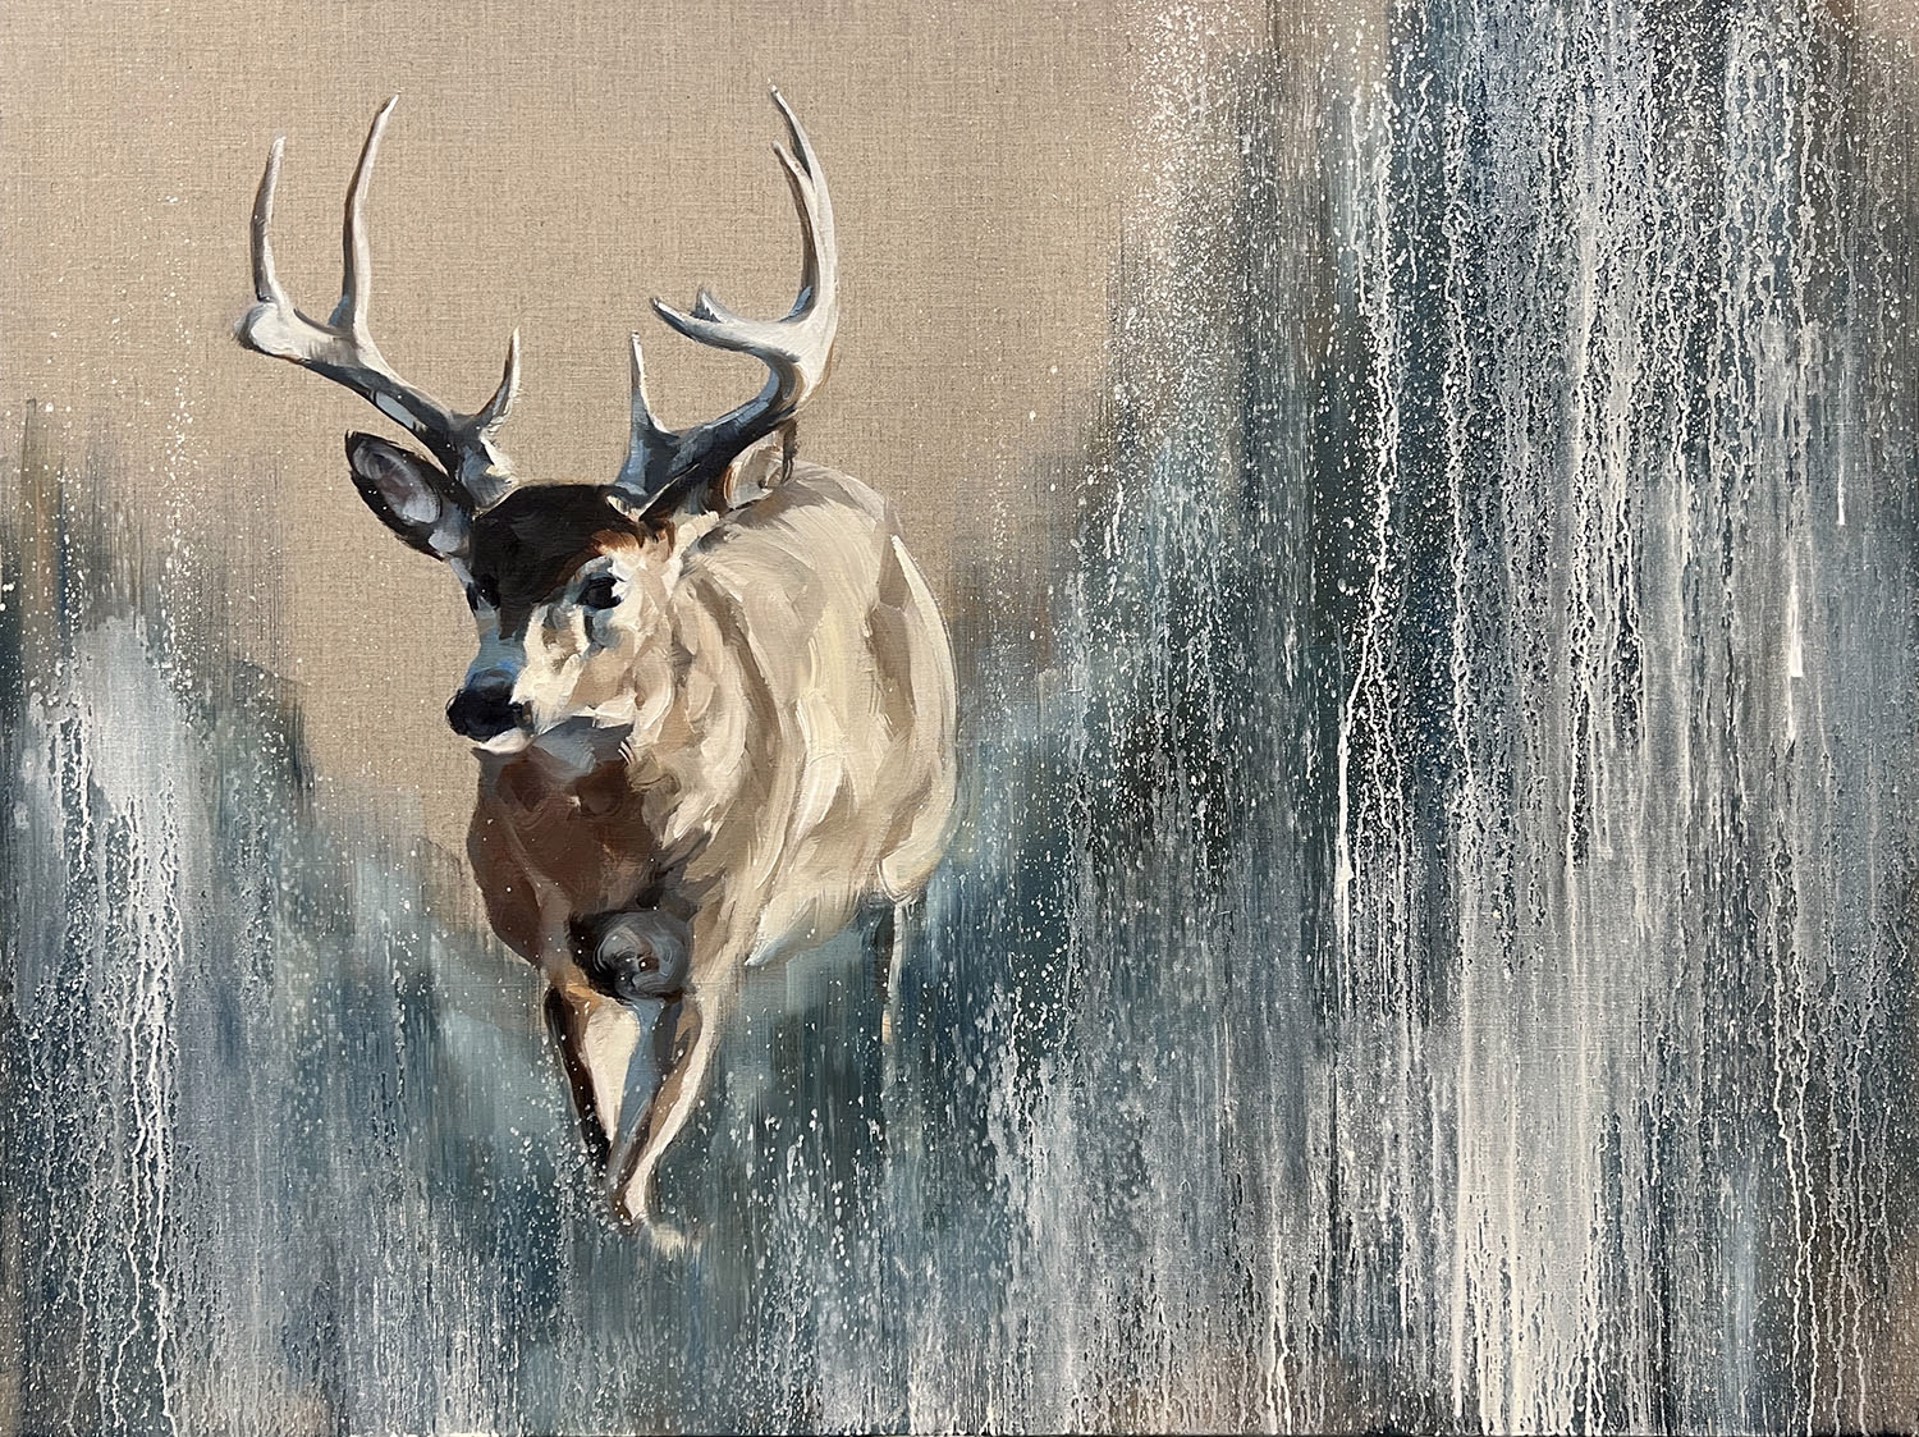 Whitetail buck emerging from abstract background painted on linen